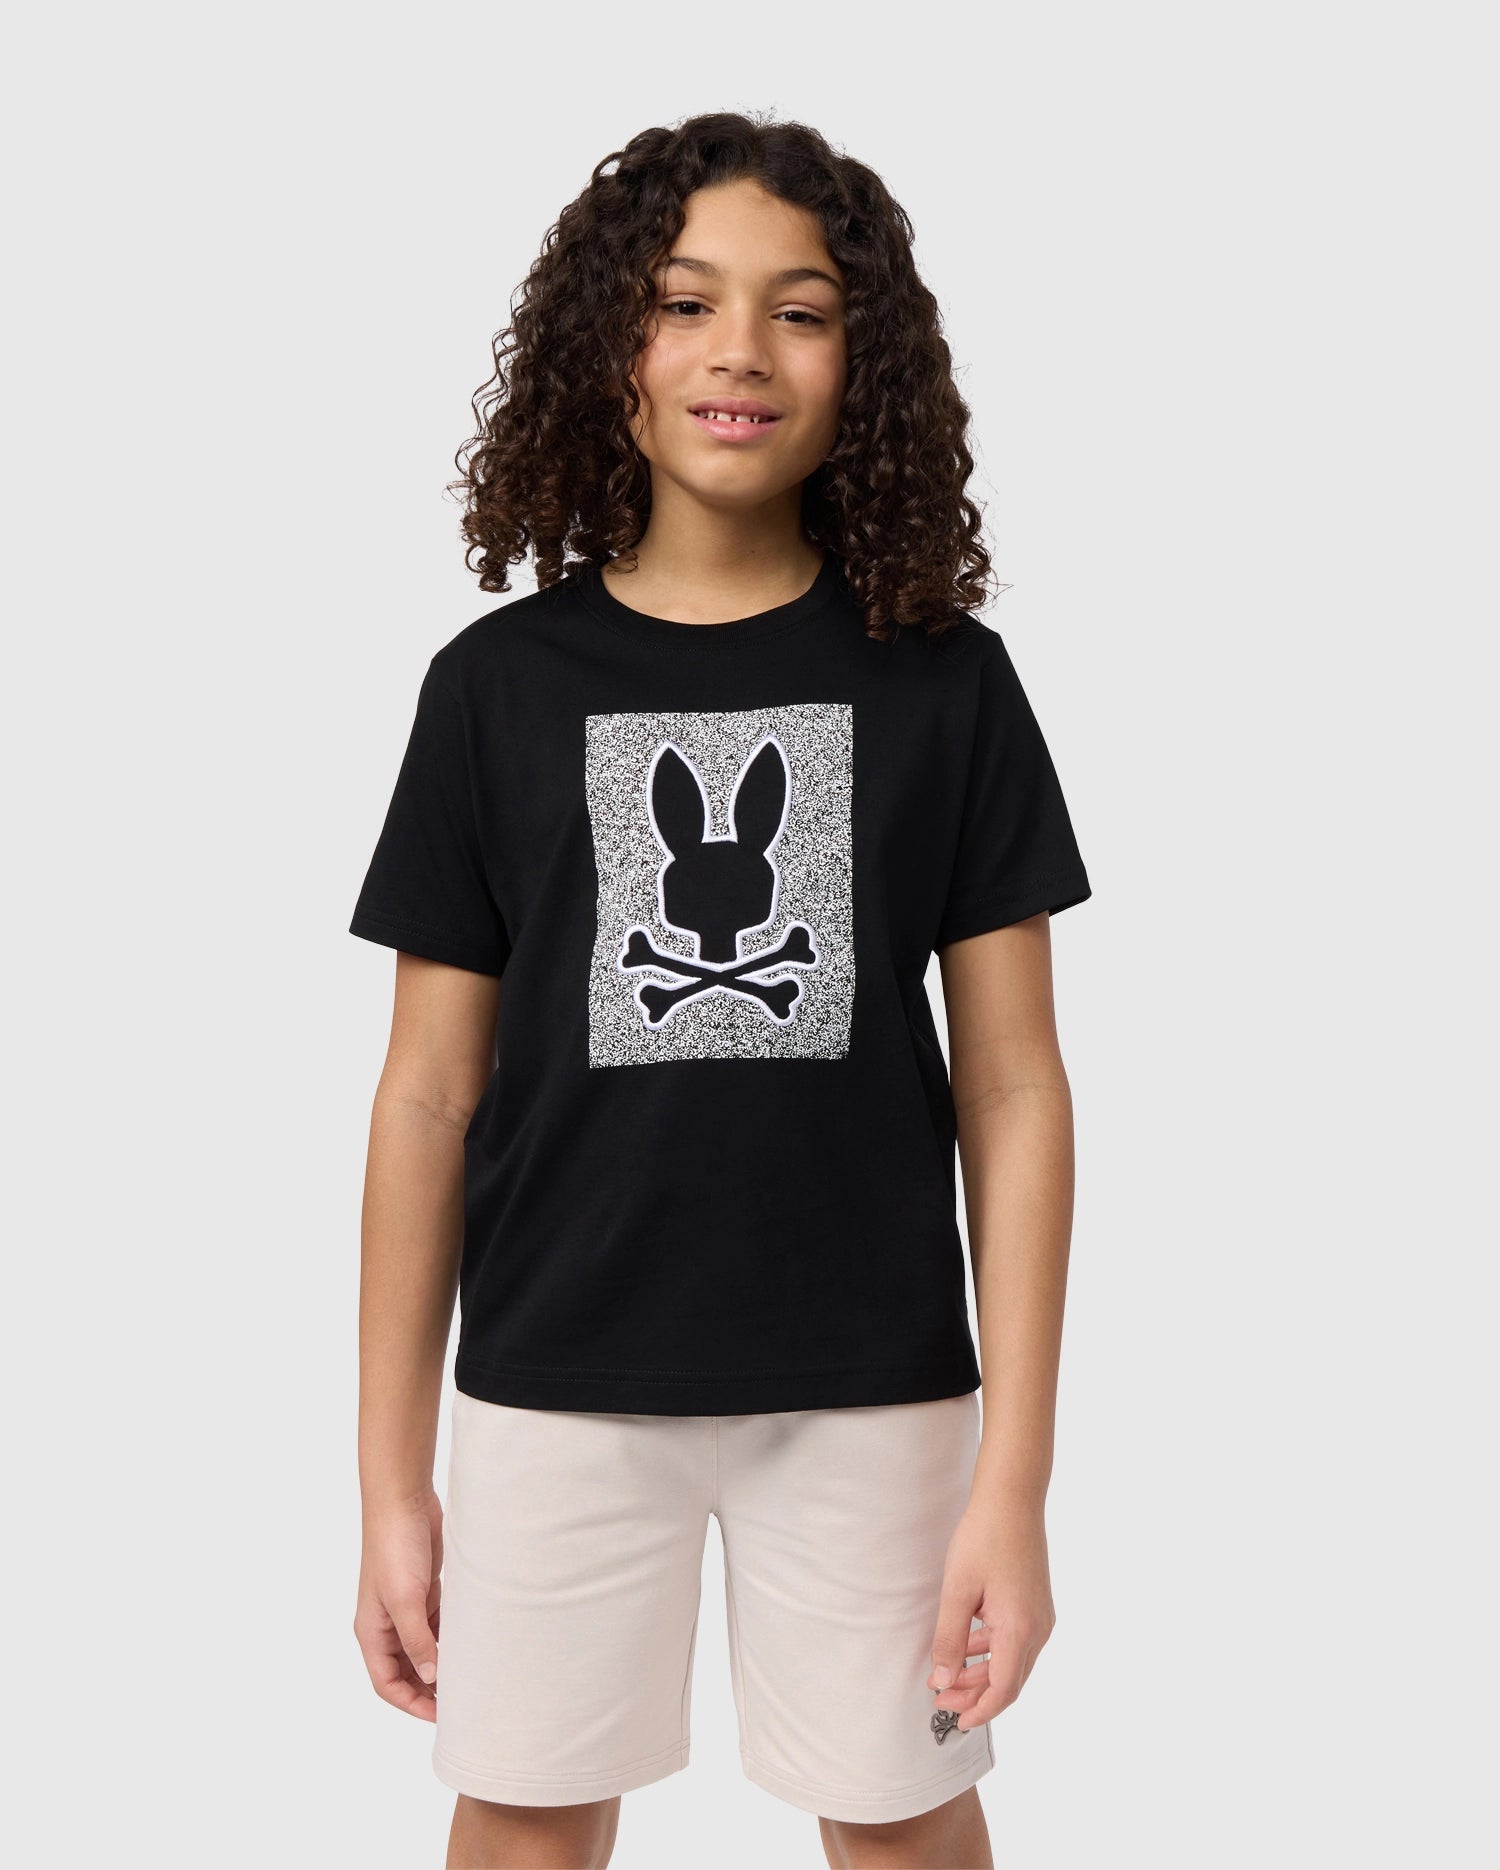 A smiling child with curly hair is wearing a black KIDS LIVINGSTON GRAPHIC TEE - B0U247B2TS by Psycho Bunny featuring a bunny skull and crossbones design. They are also wearing light-colored shorts and standing against a plain light gray background.